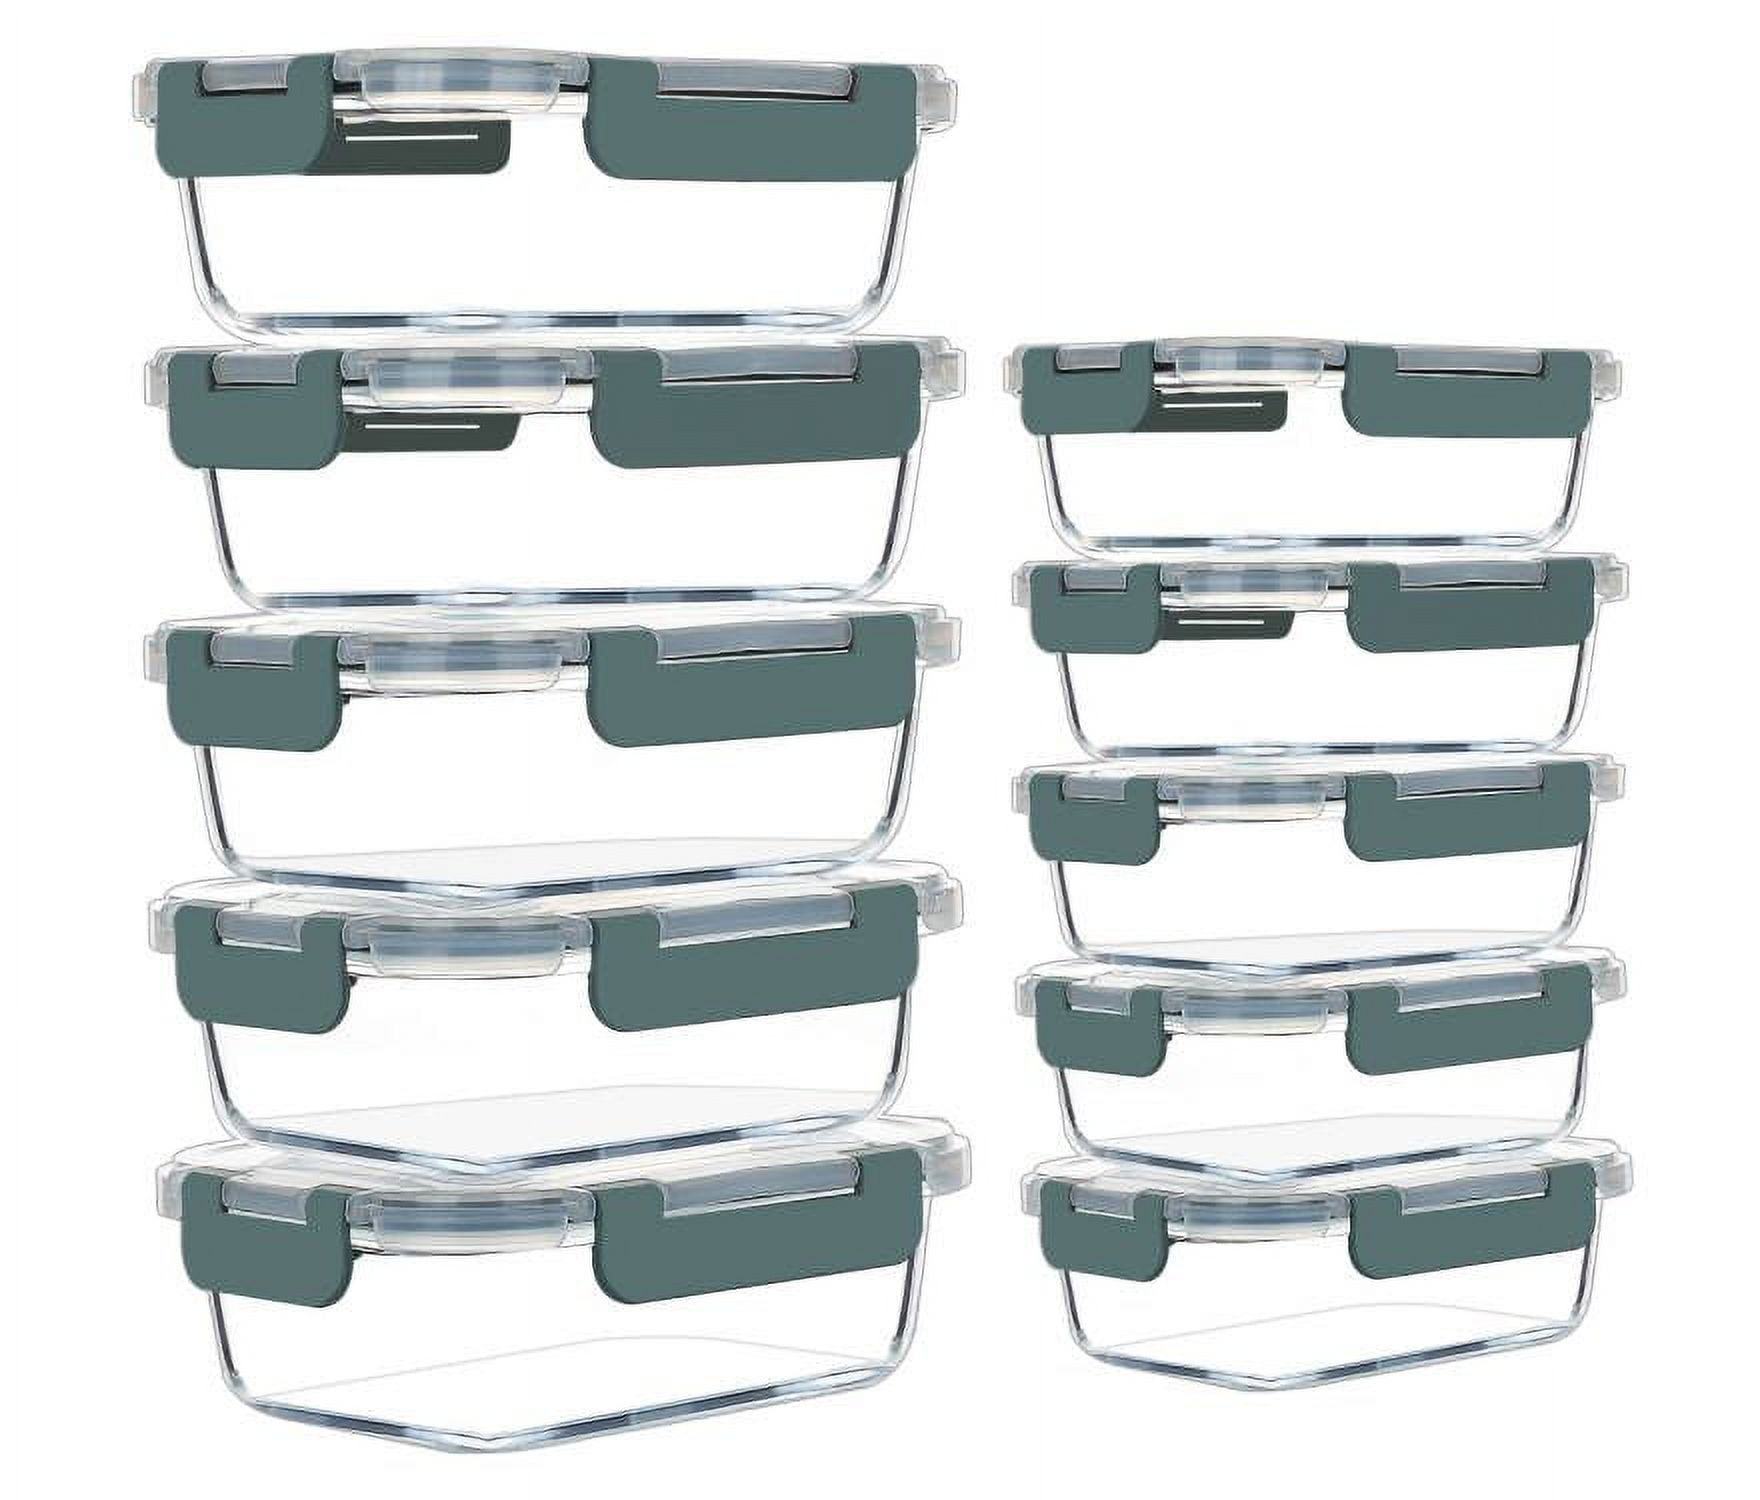  Moss & Stone Kitchen Glass Food Storage Containers Set with  Lids 10 Pcs. Snapware Transparent Lids Leak Proof, Oven, Freezer, Microwave  & Dishwasher Safe, Airtight Meal Prep Container Glass BPA-Free: Home